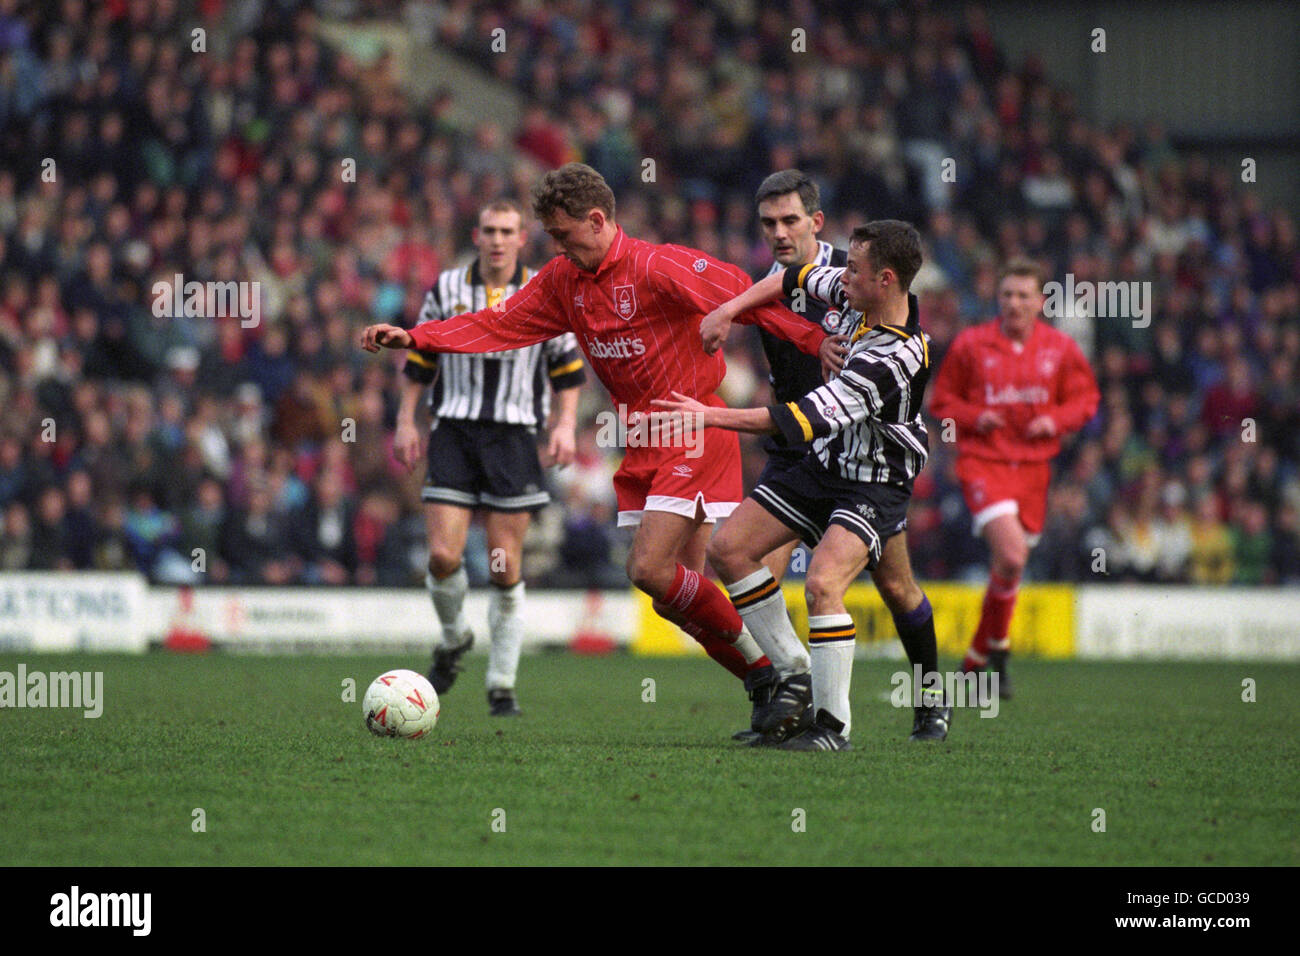 Soccer - Endsleigh League Division One - Notts County v Nottingham Forest - Meadow Lane. Nottingham Forest's Lars Bohinen holds off Notts County's Paul Devlin, watched by referee Philip Don. Stock Photo